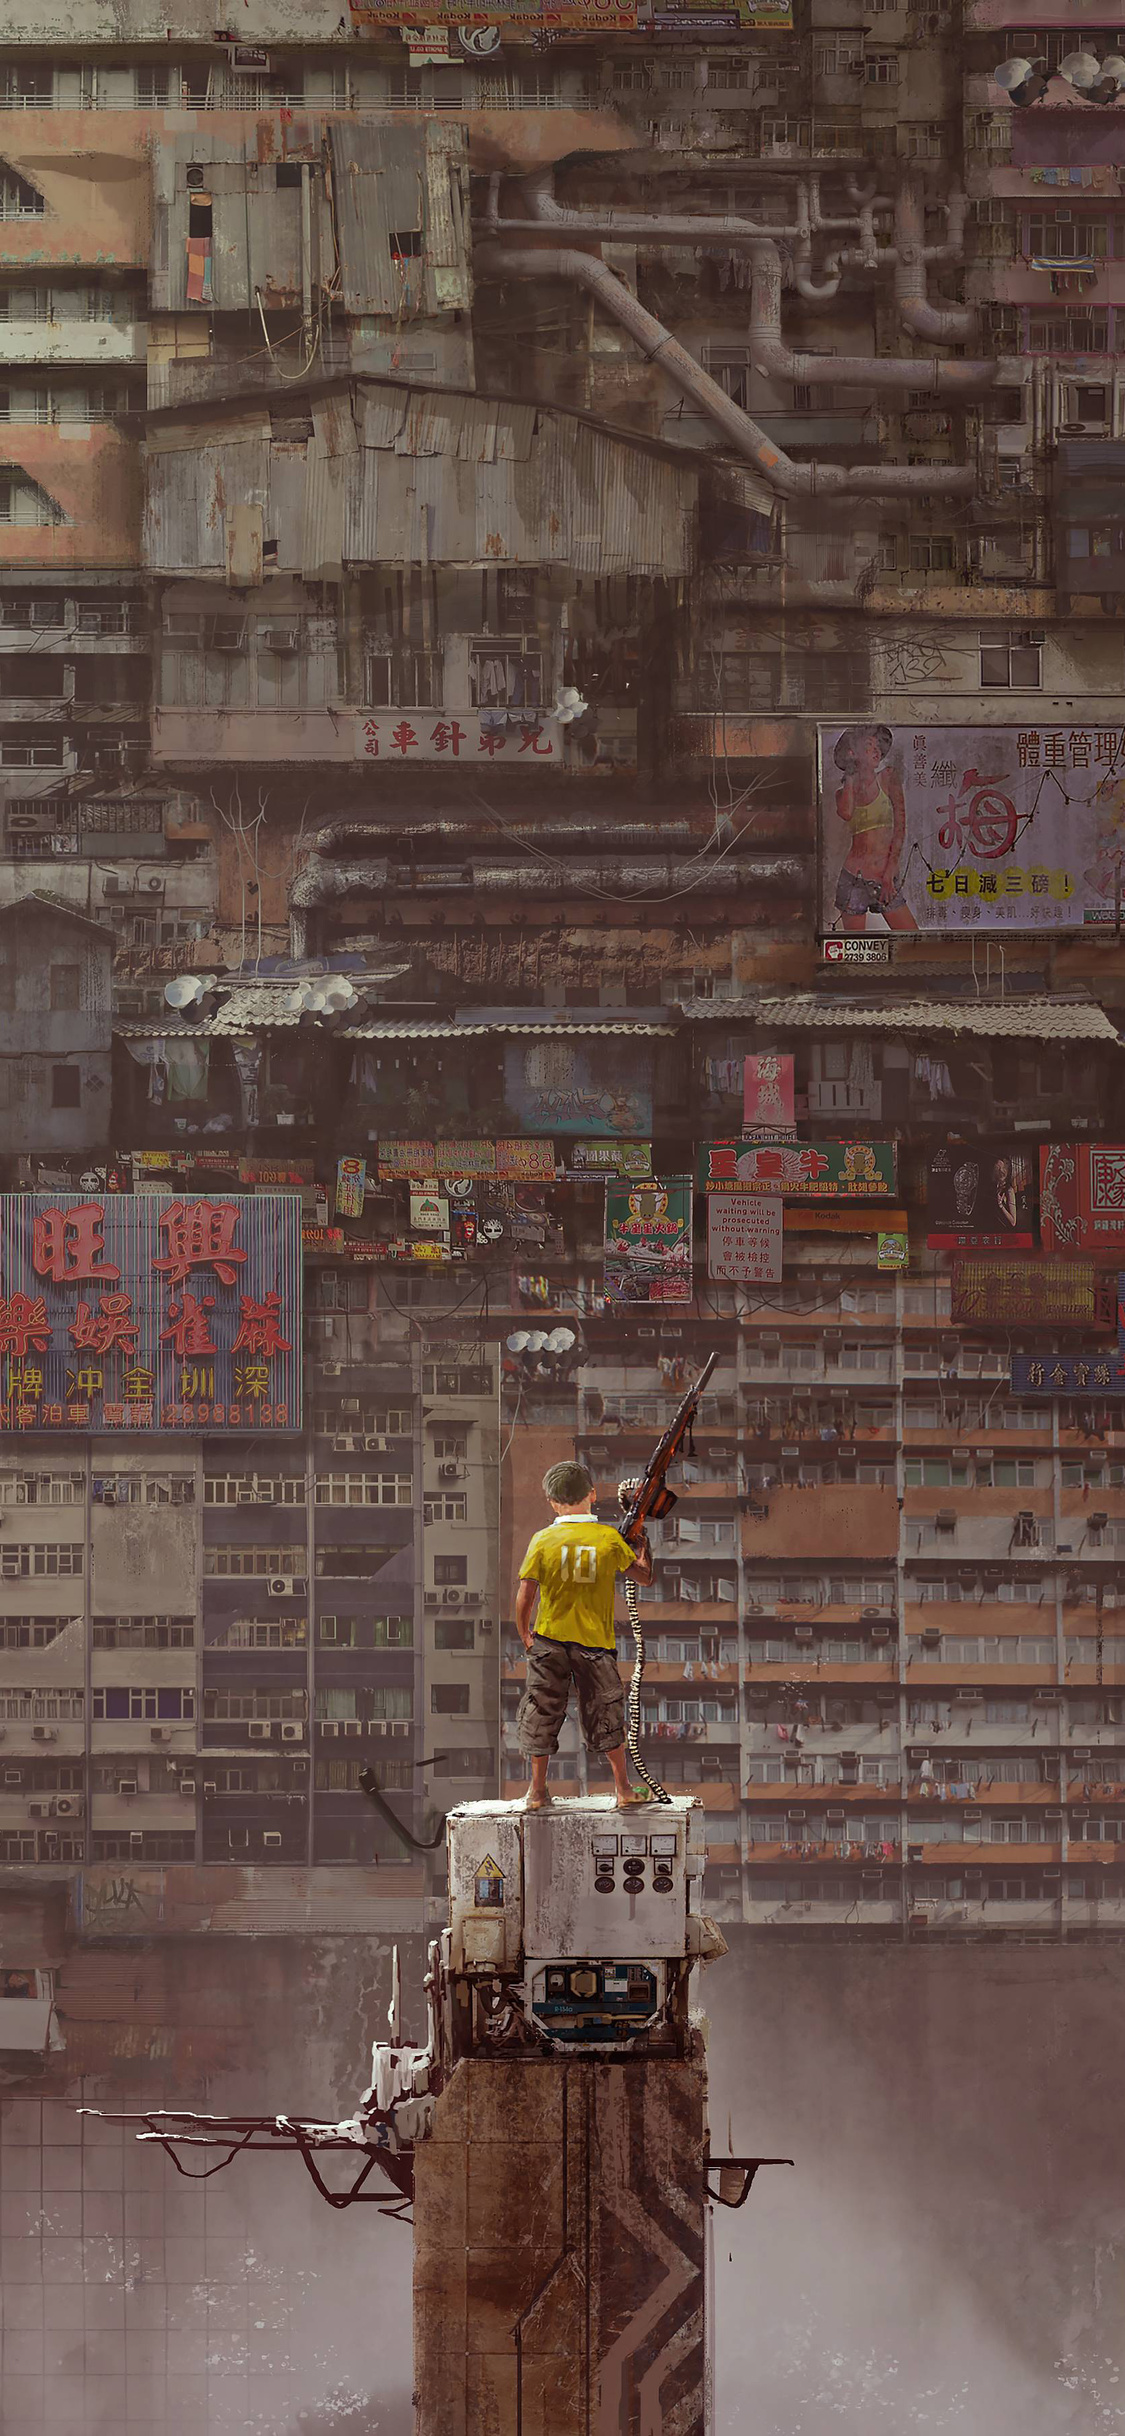 Boy With Gun Apocalypse Kowloon Walled City Art 5k iPhone XS, iPhone iPhone X HD 4k Wallpaper, Image, Background, Photo and Picture